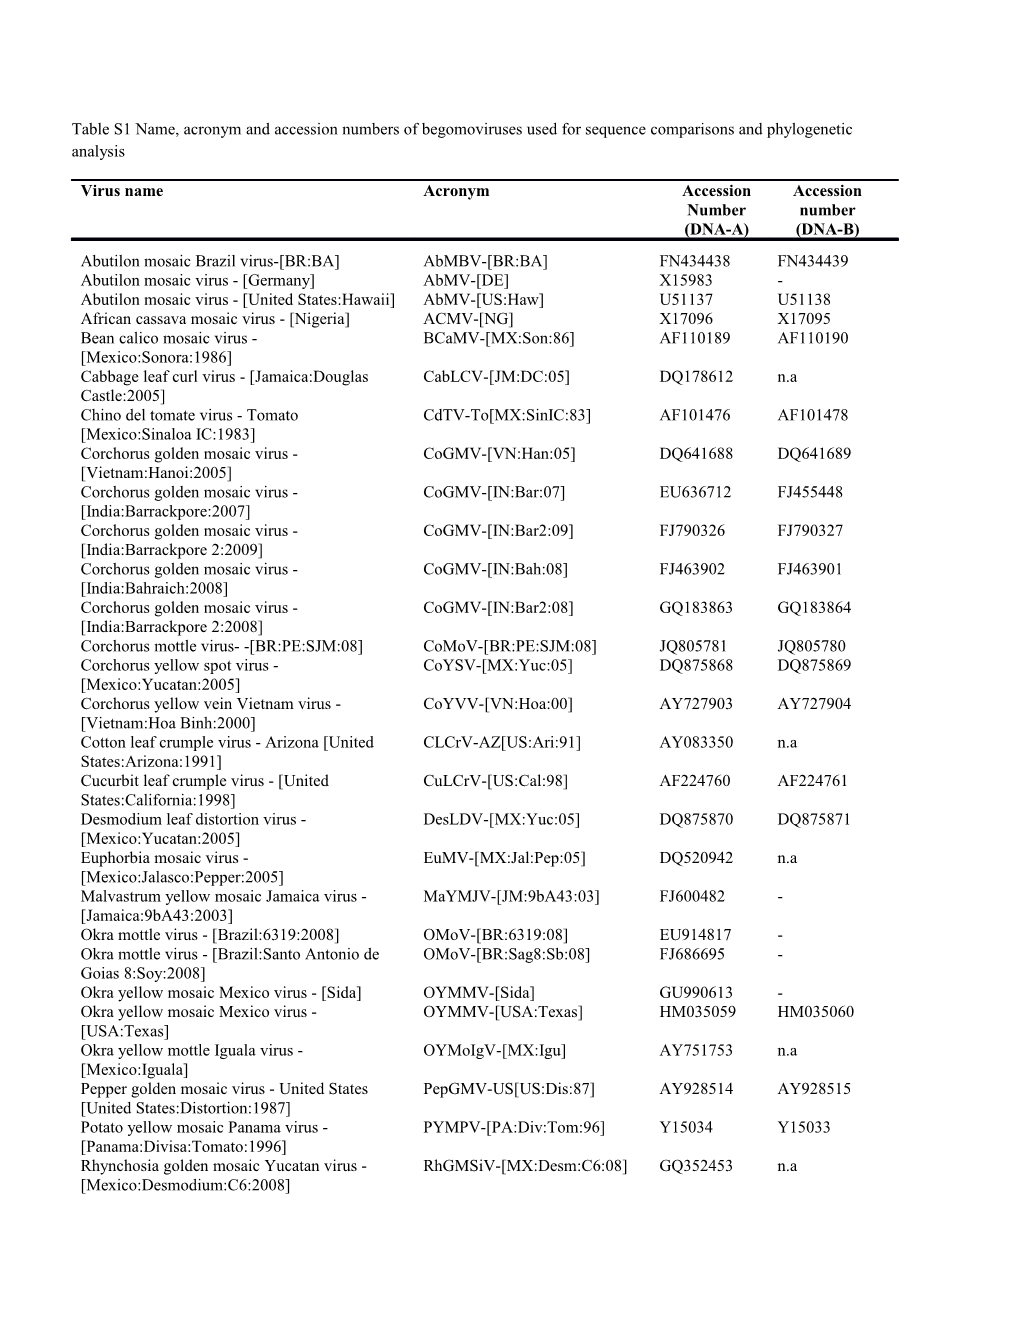 Table S1 Name, Acronym and Accession Numbers of Begomoviruses Used for Sequence Comparisons